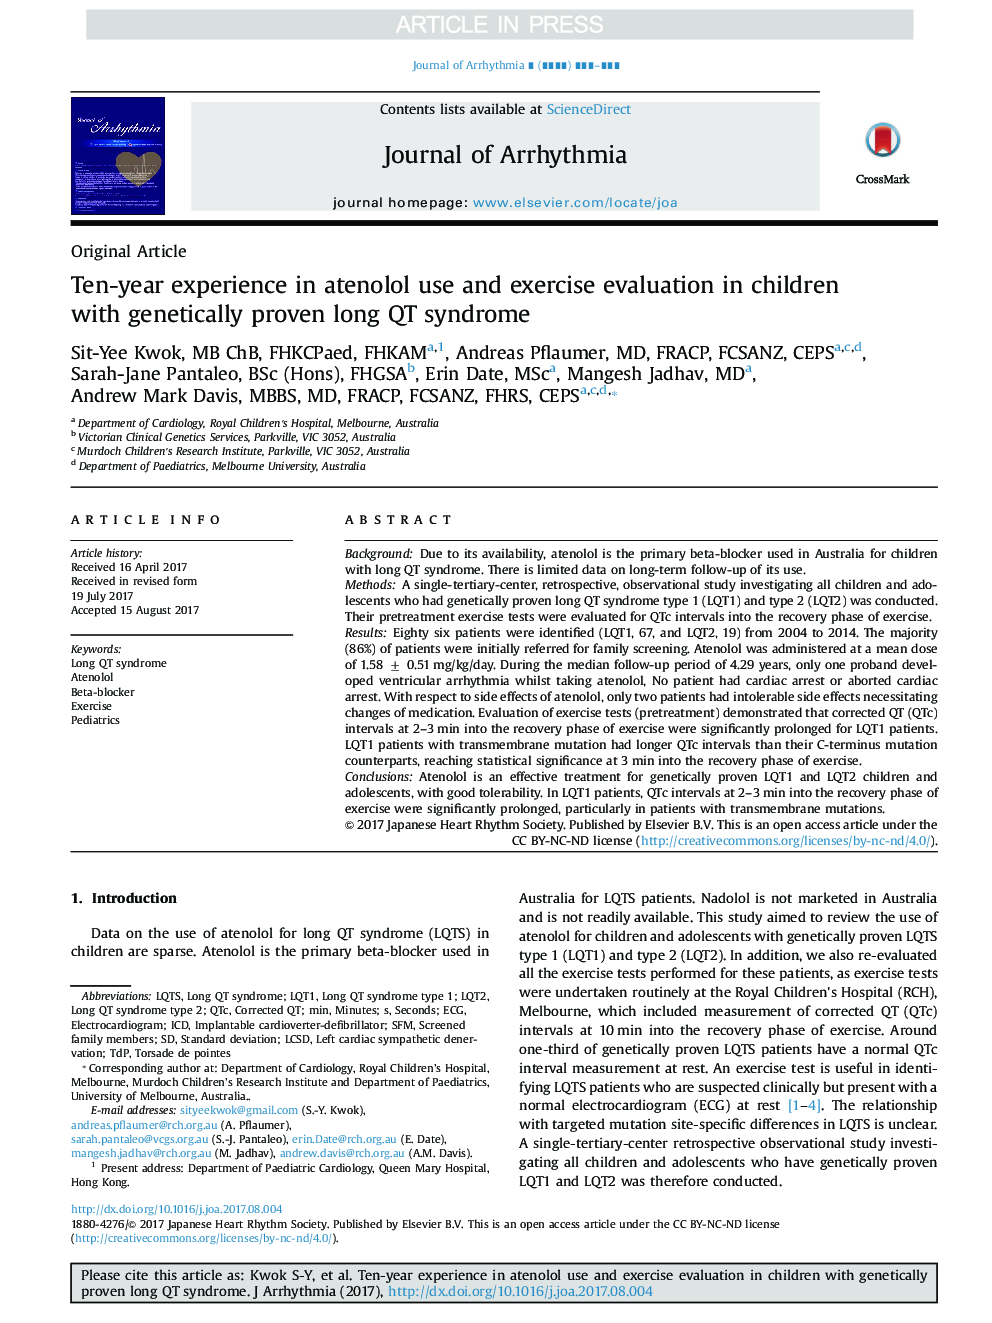 Ten-year experience in atenolol use and exercise evaluation in children with genetically proven long QT syndrome